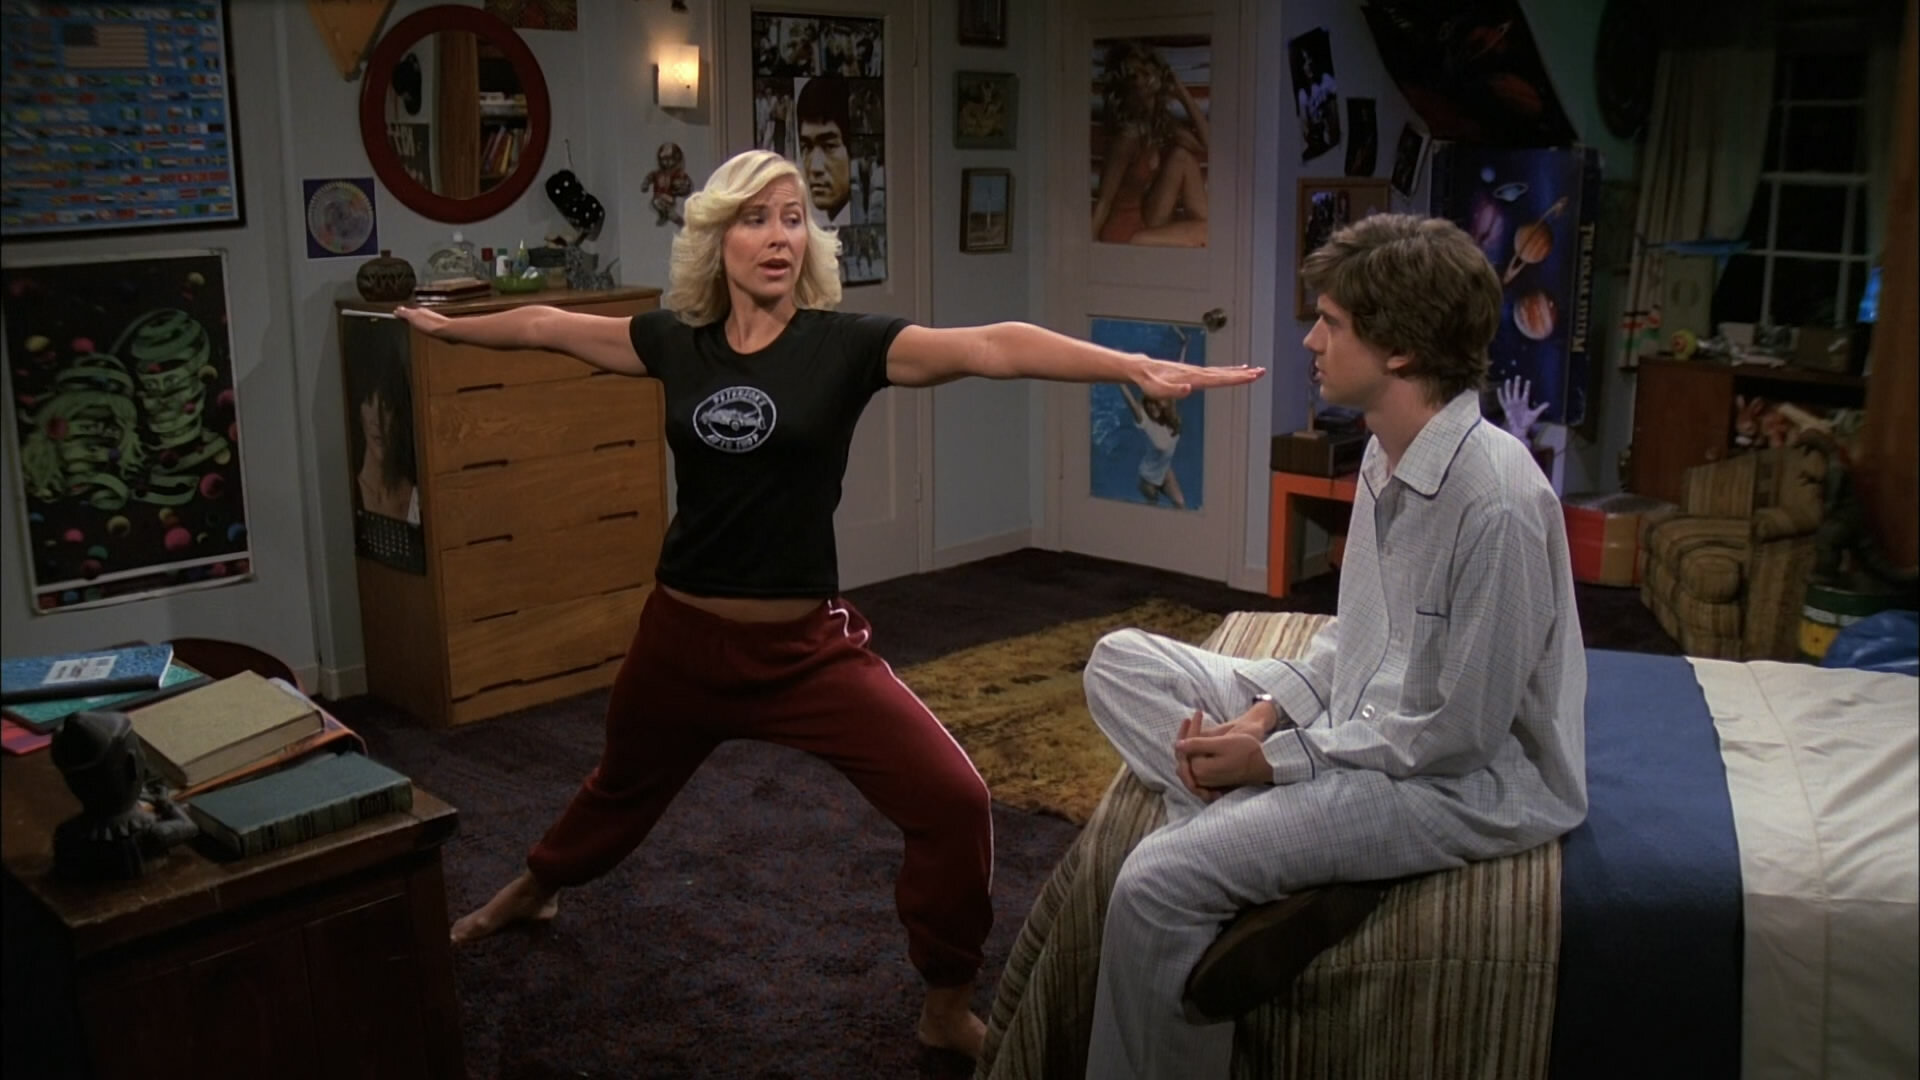 bujamin asani recommends Penny From That 70s Show